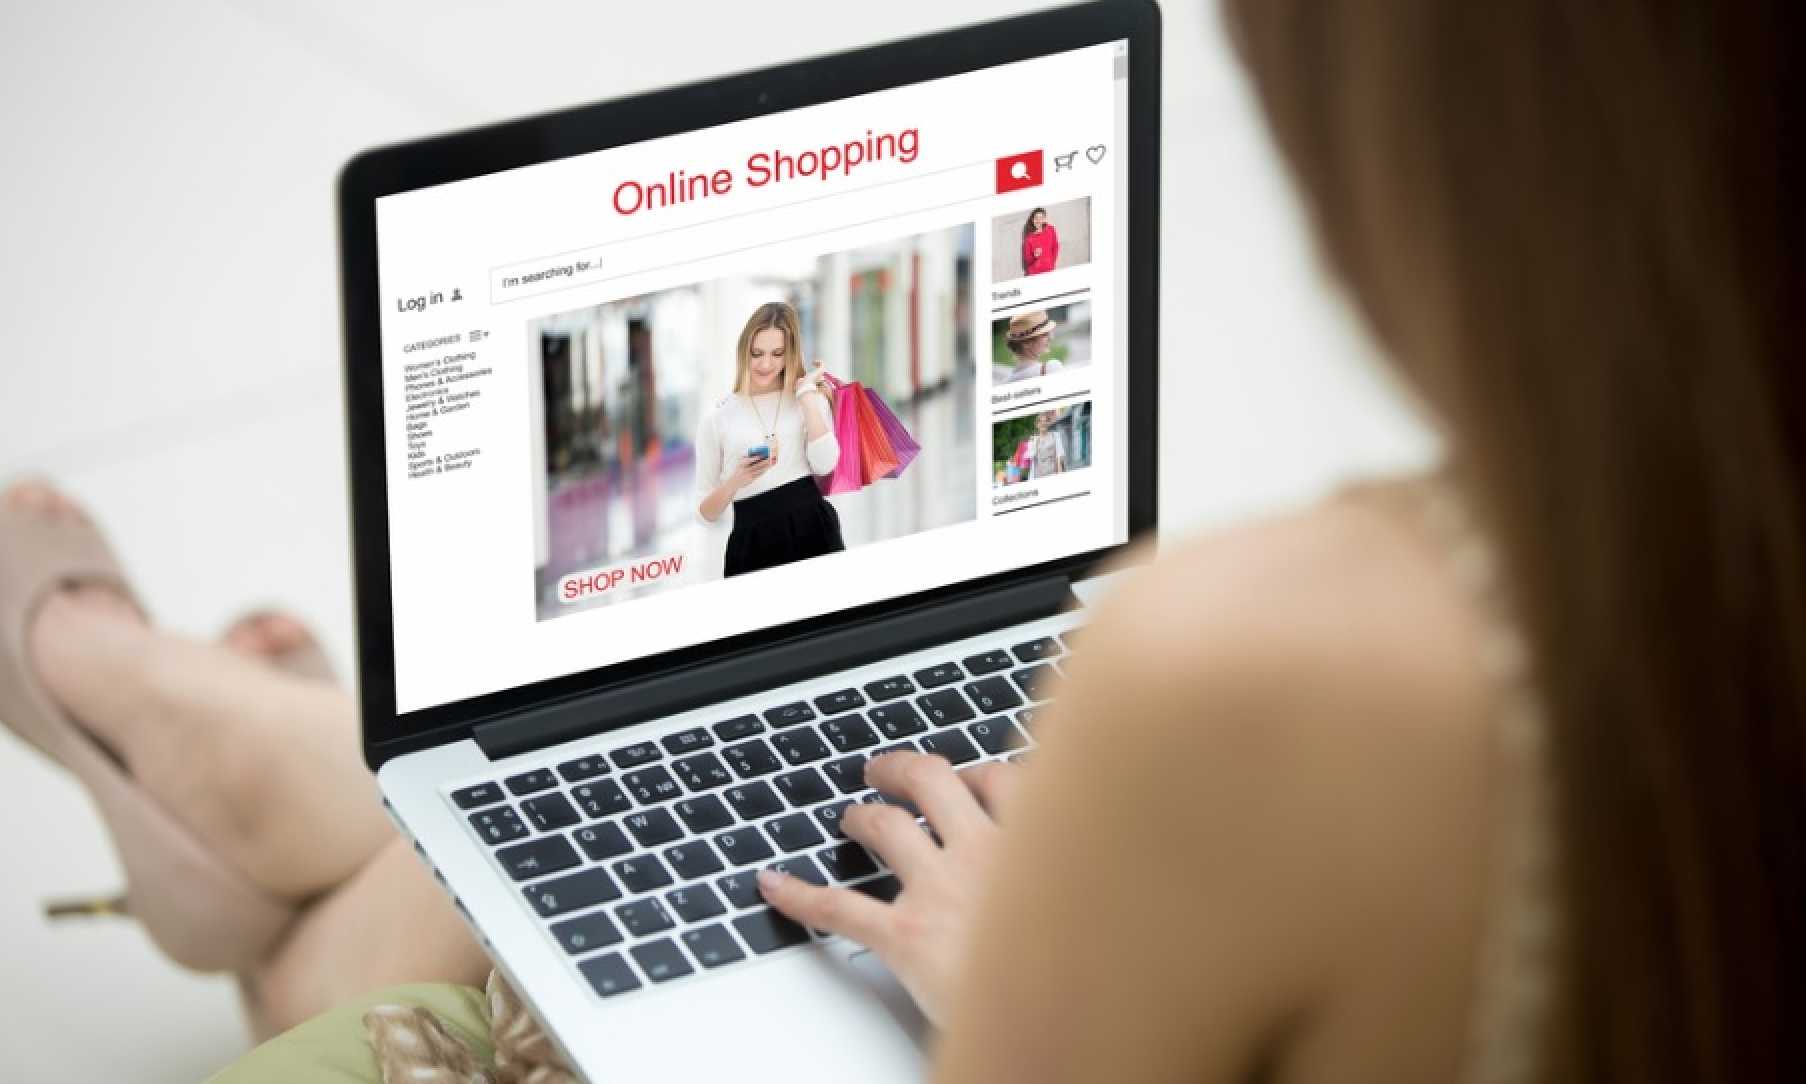 Top Marketing Tips for Your Online Clothing Business